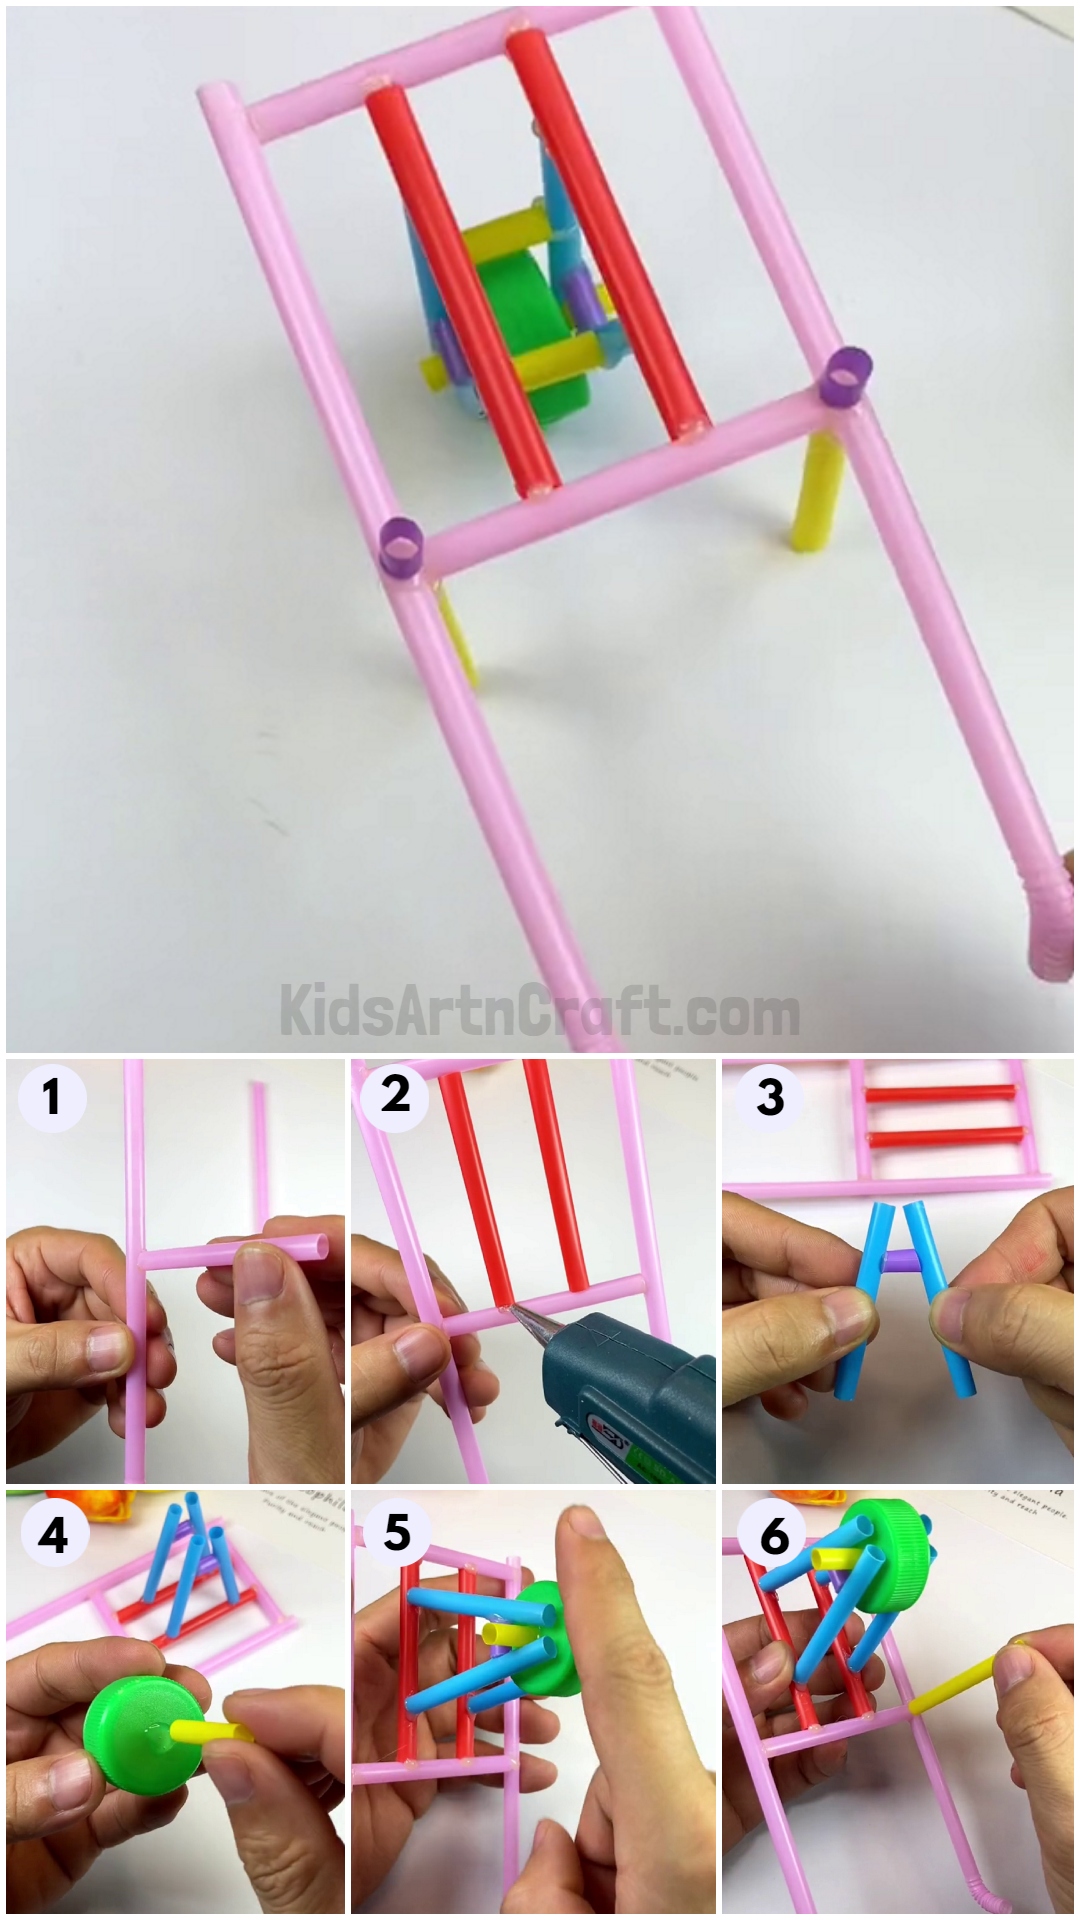 How to Make Cart Using Plastic Straw Easy Tutorial